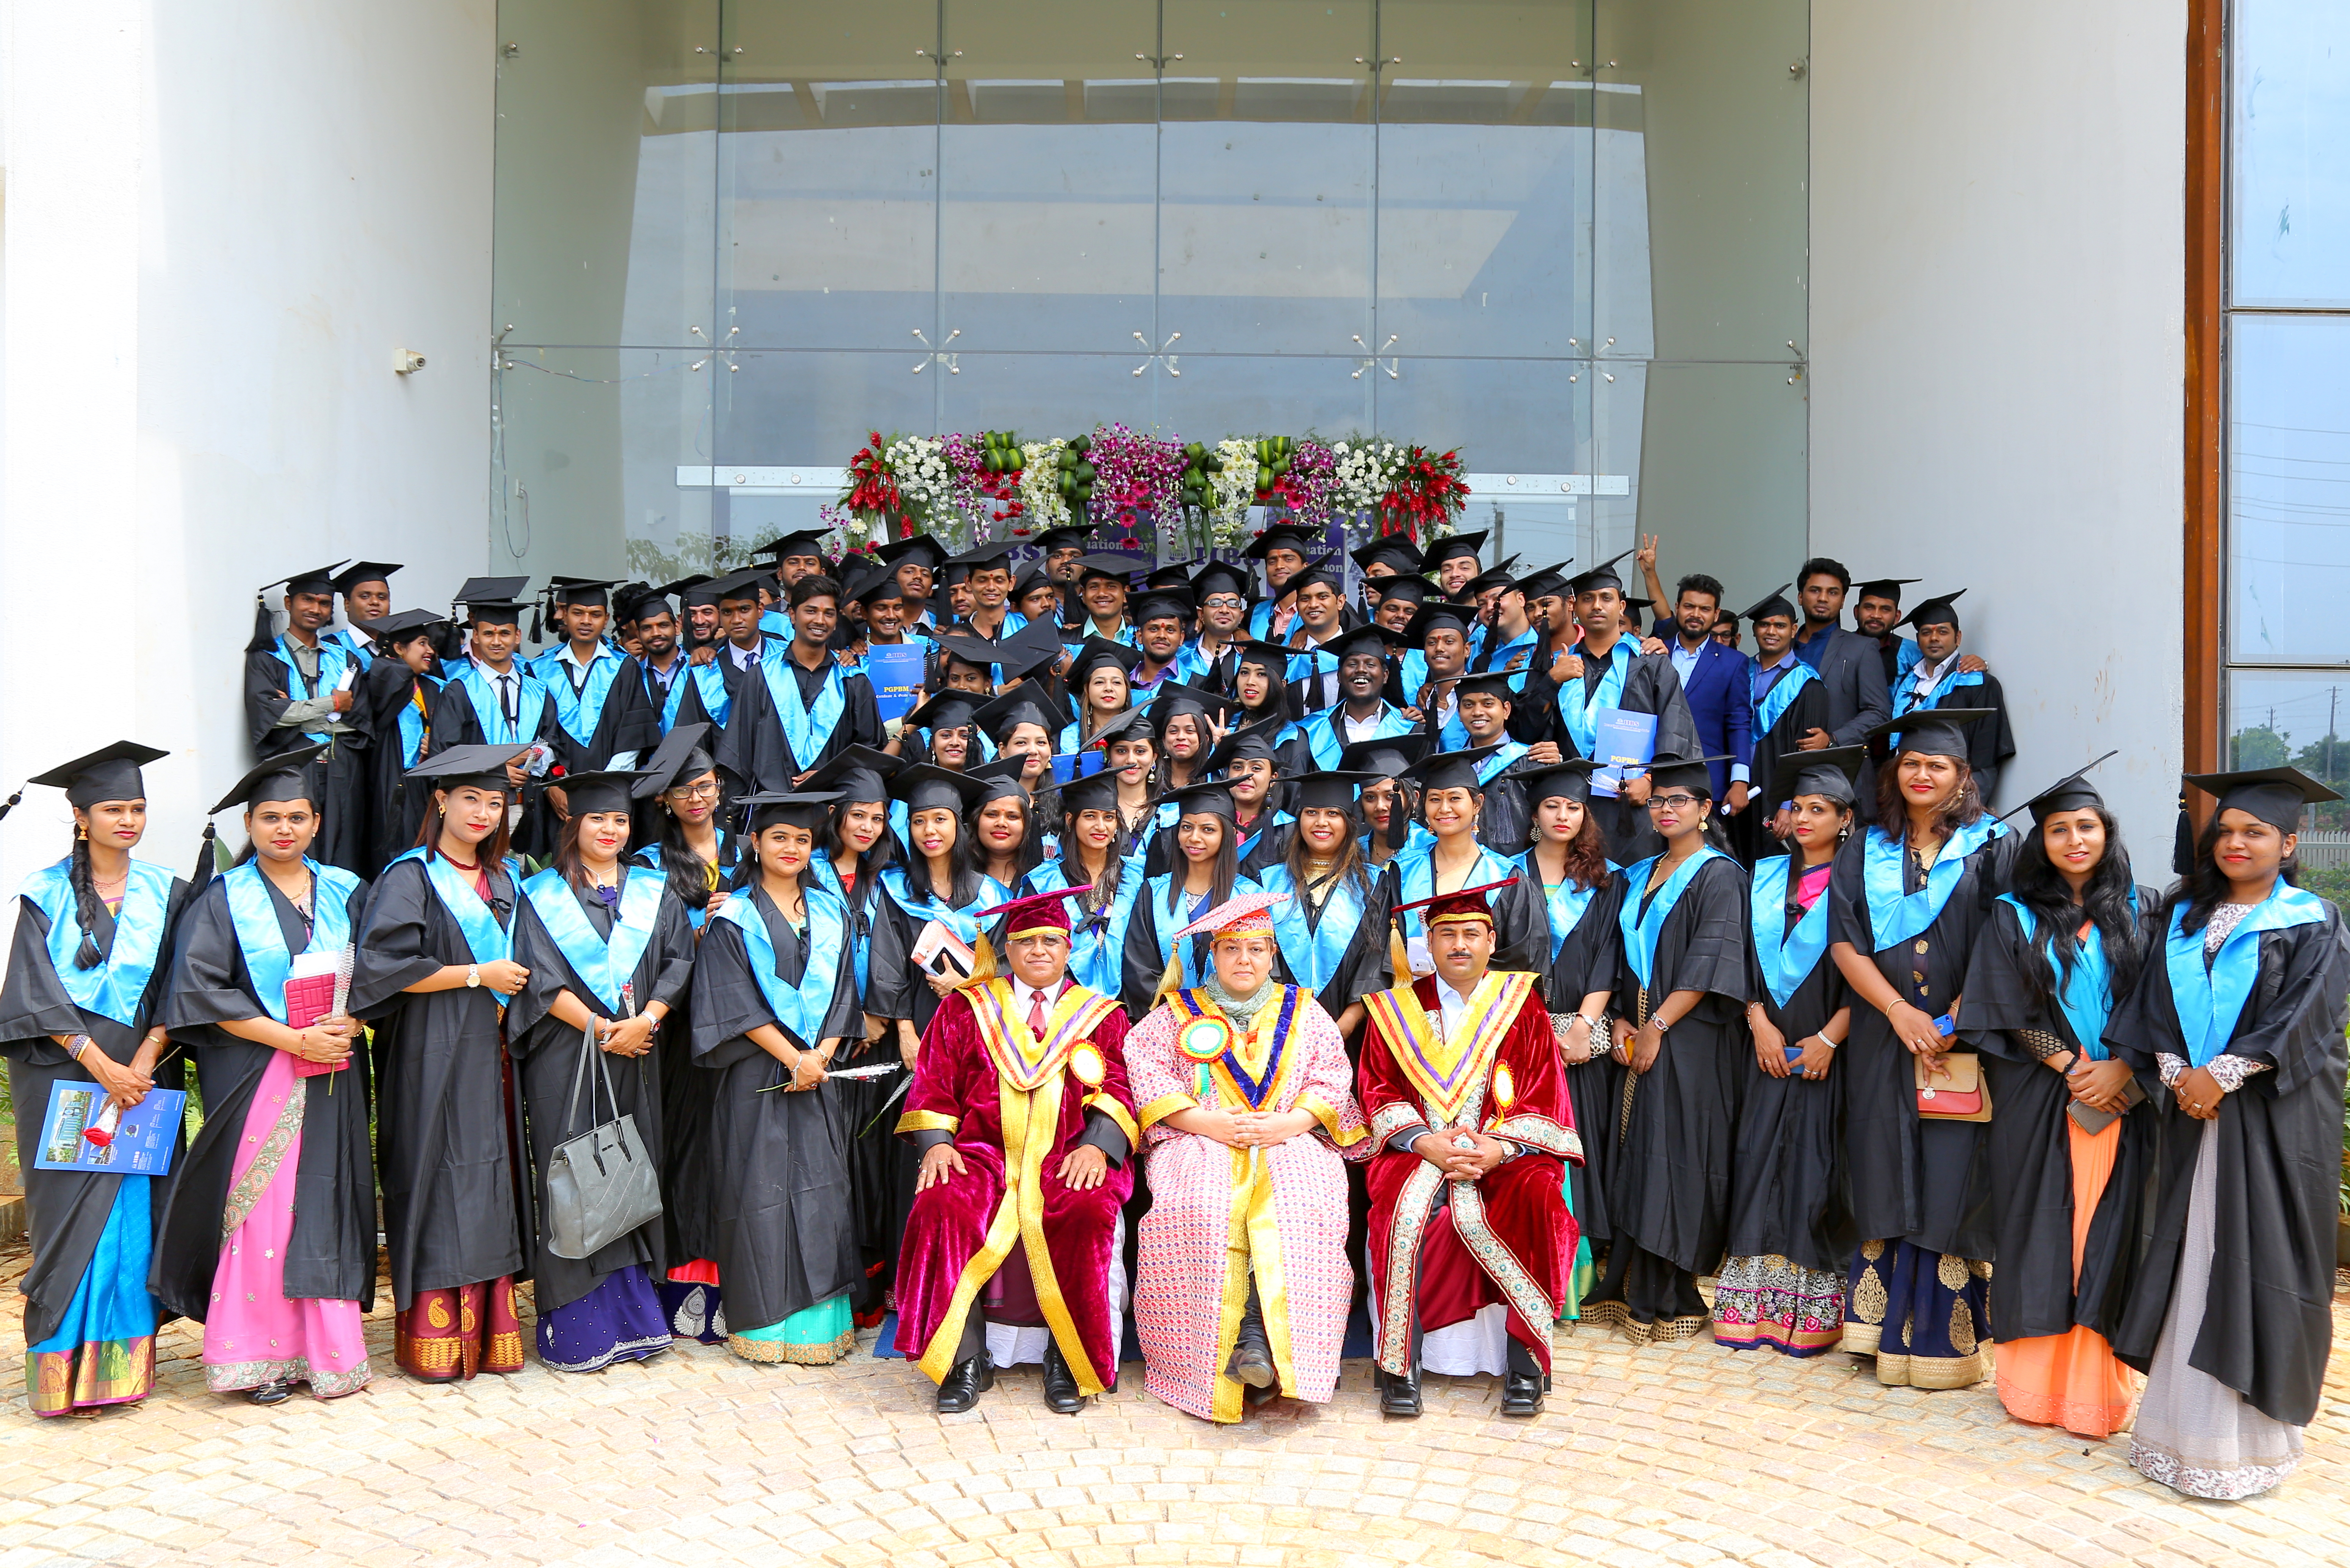 IIBS Graduation Day - a day to congregate, acknowledge, and relive